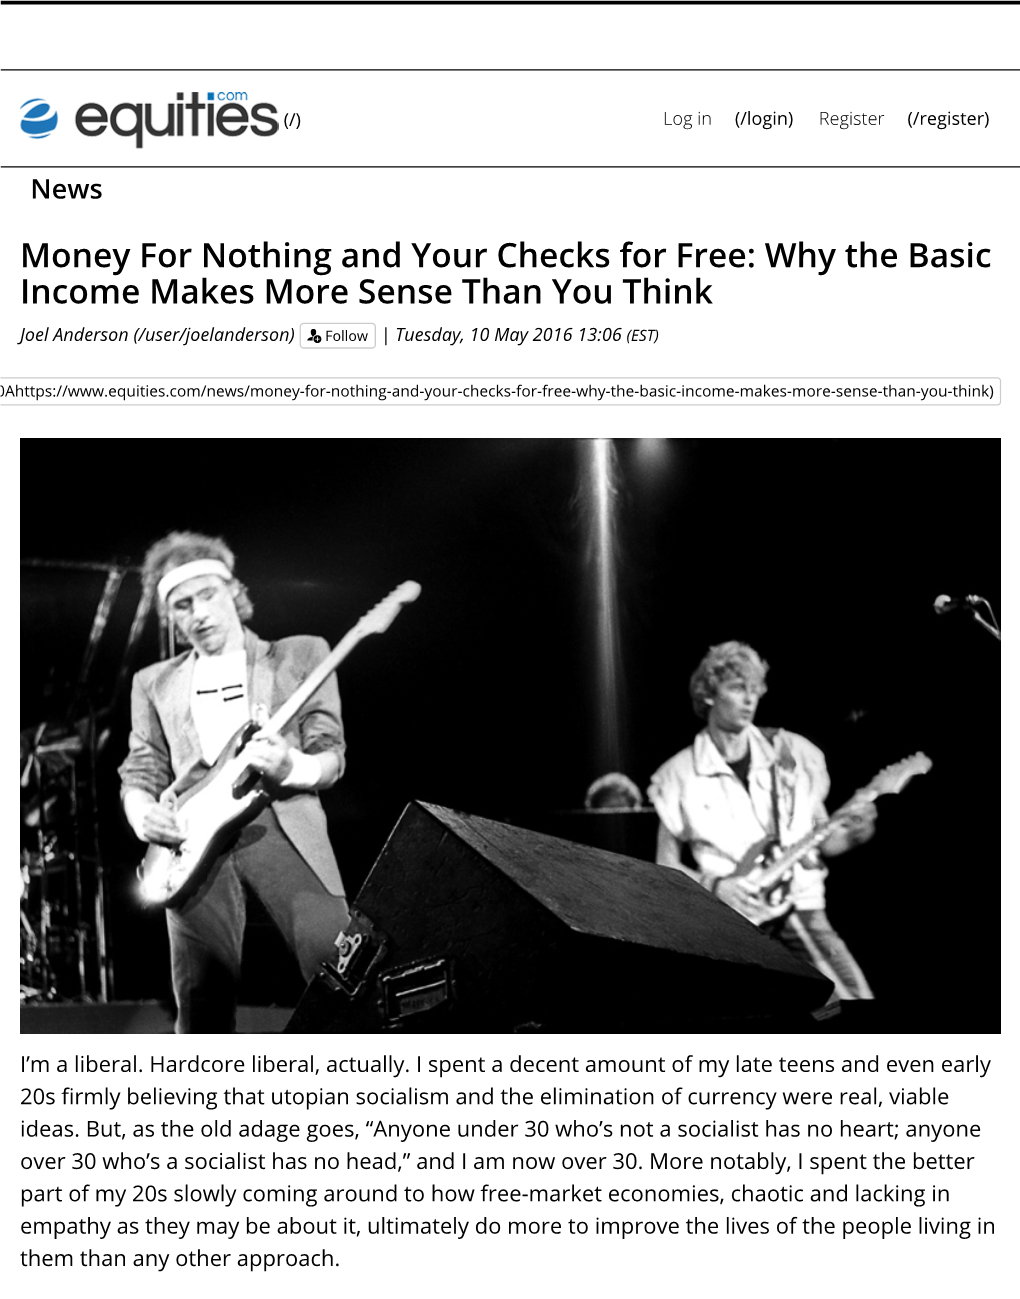 Money for Nothing and Your Checks for Free: Why the Basic Income Makes More Sense Than You Think